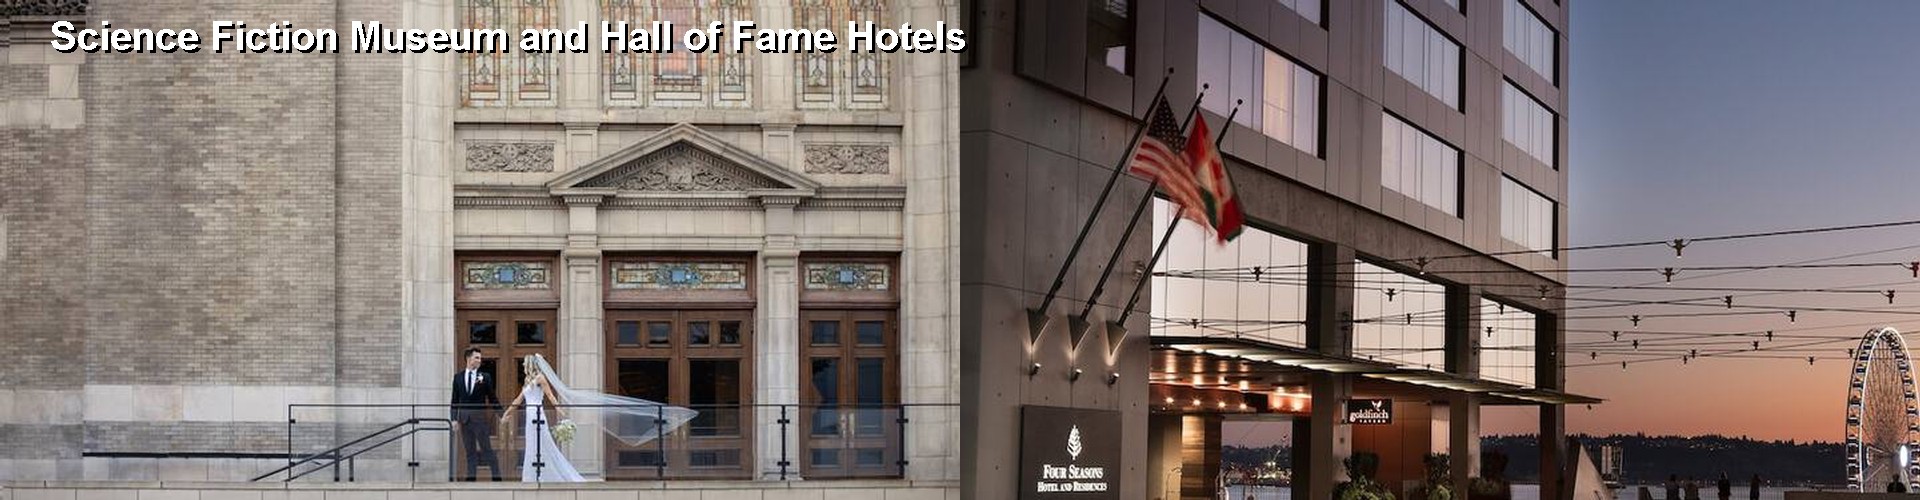 4 Best Hotels near Science Fiction Museum and Hall of Fame